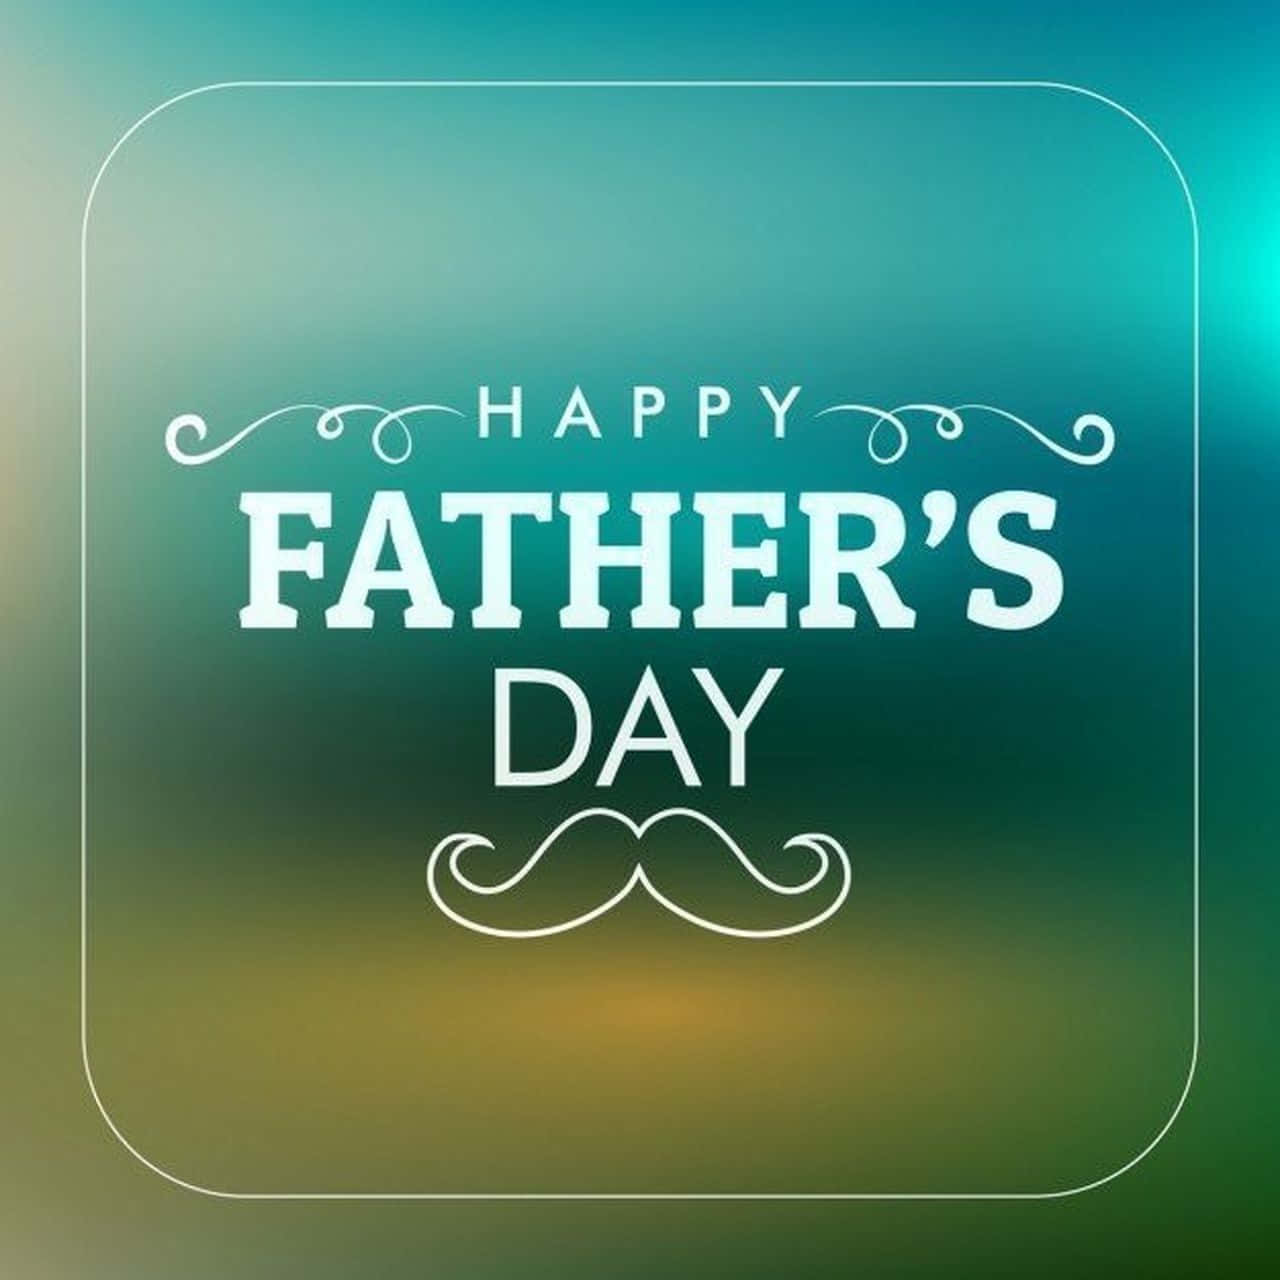 Celebrate father’s day with this beautiful background